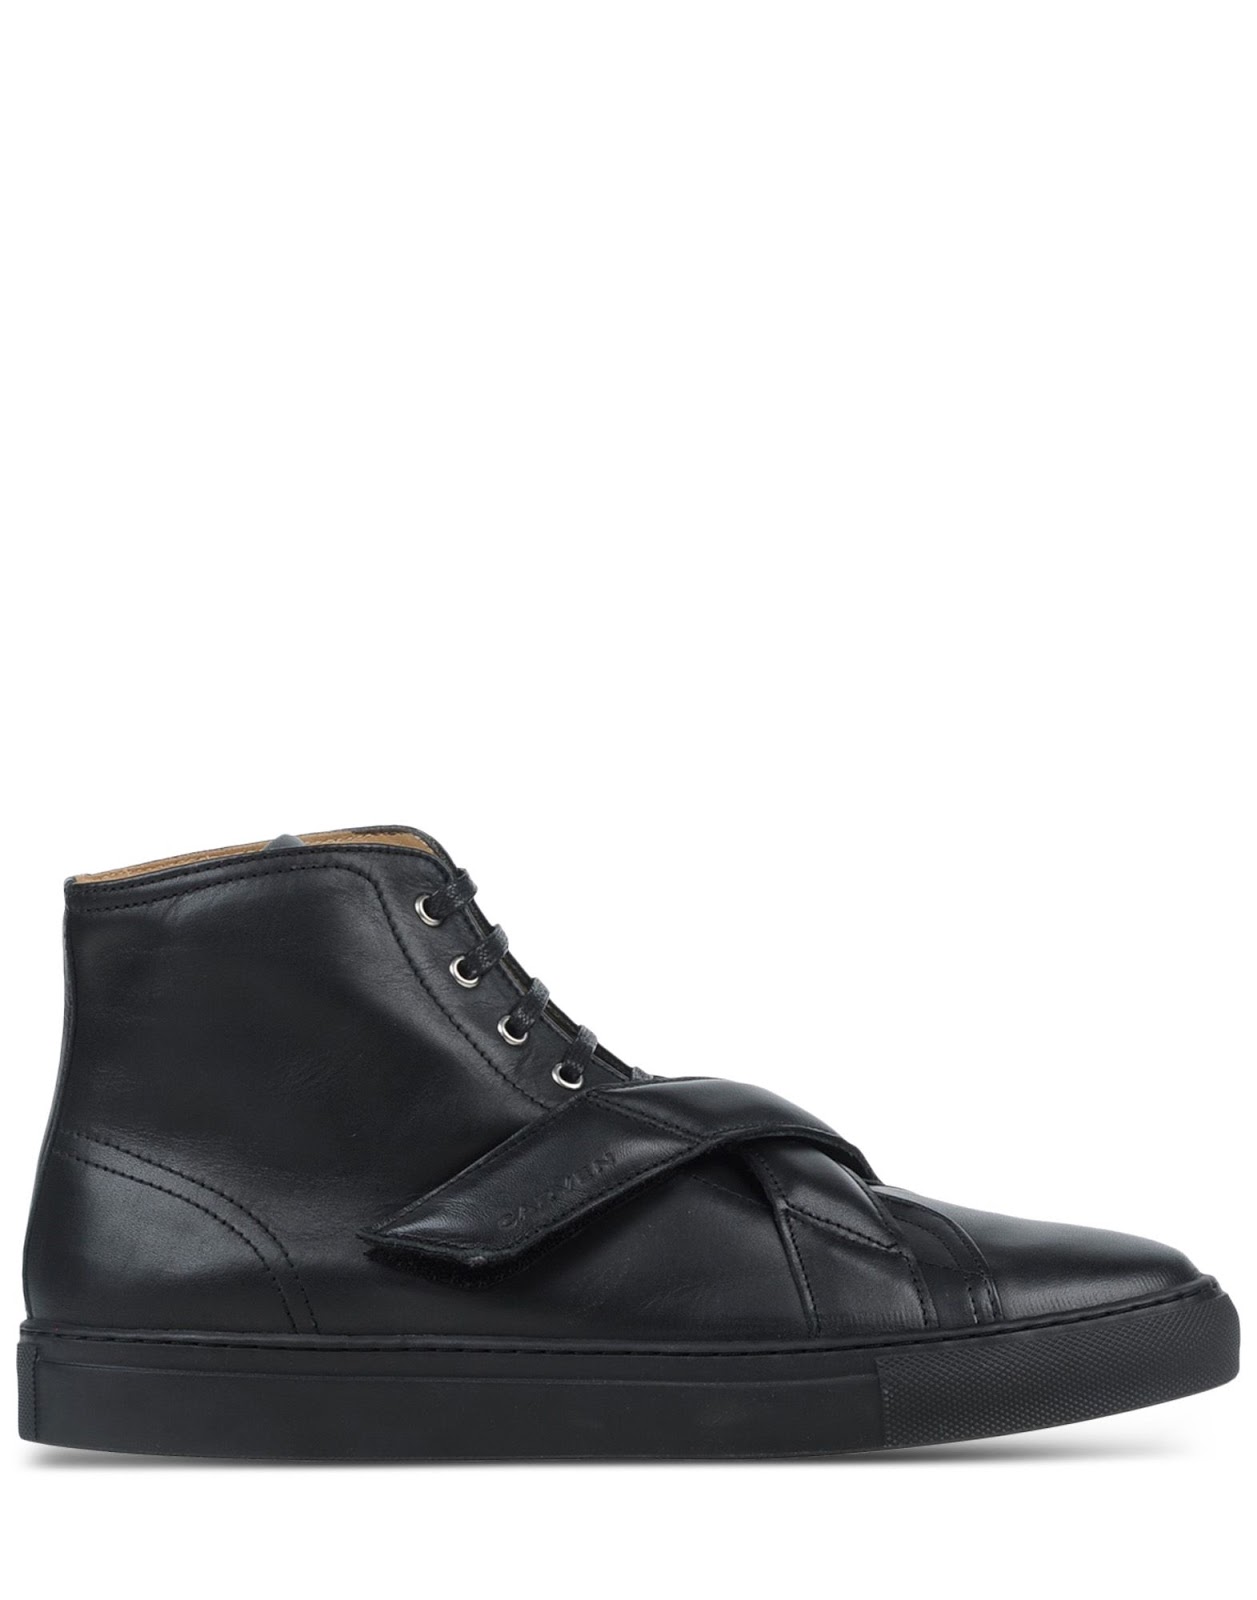 Coolly Criss-Crossed: Carven High-Top Trainer | SHOEOGRAPHY